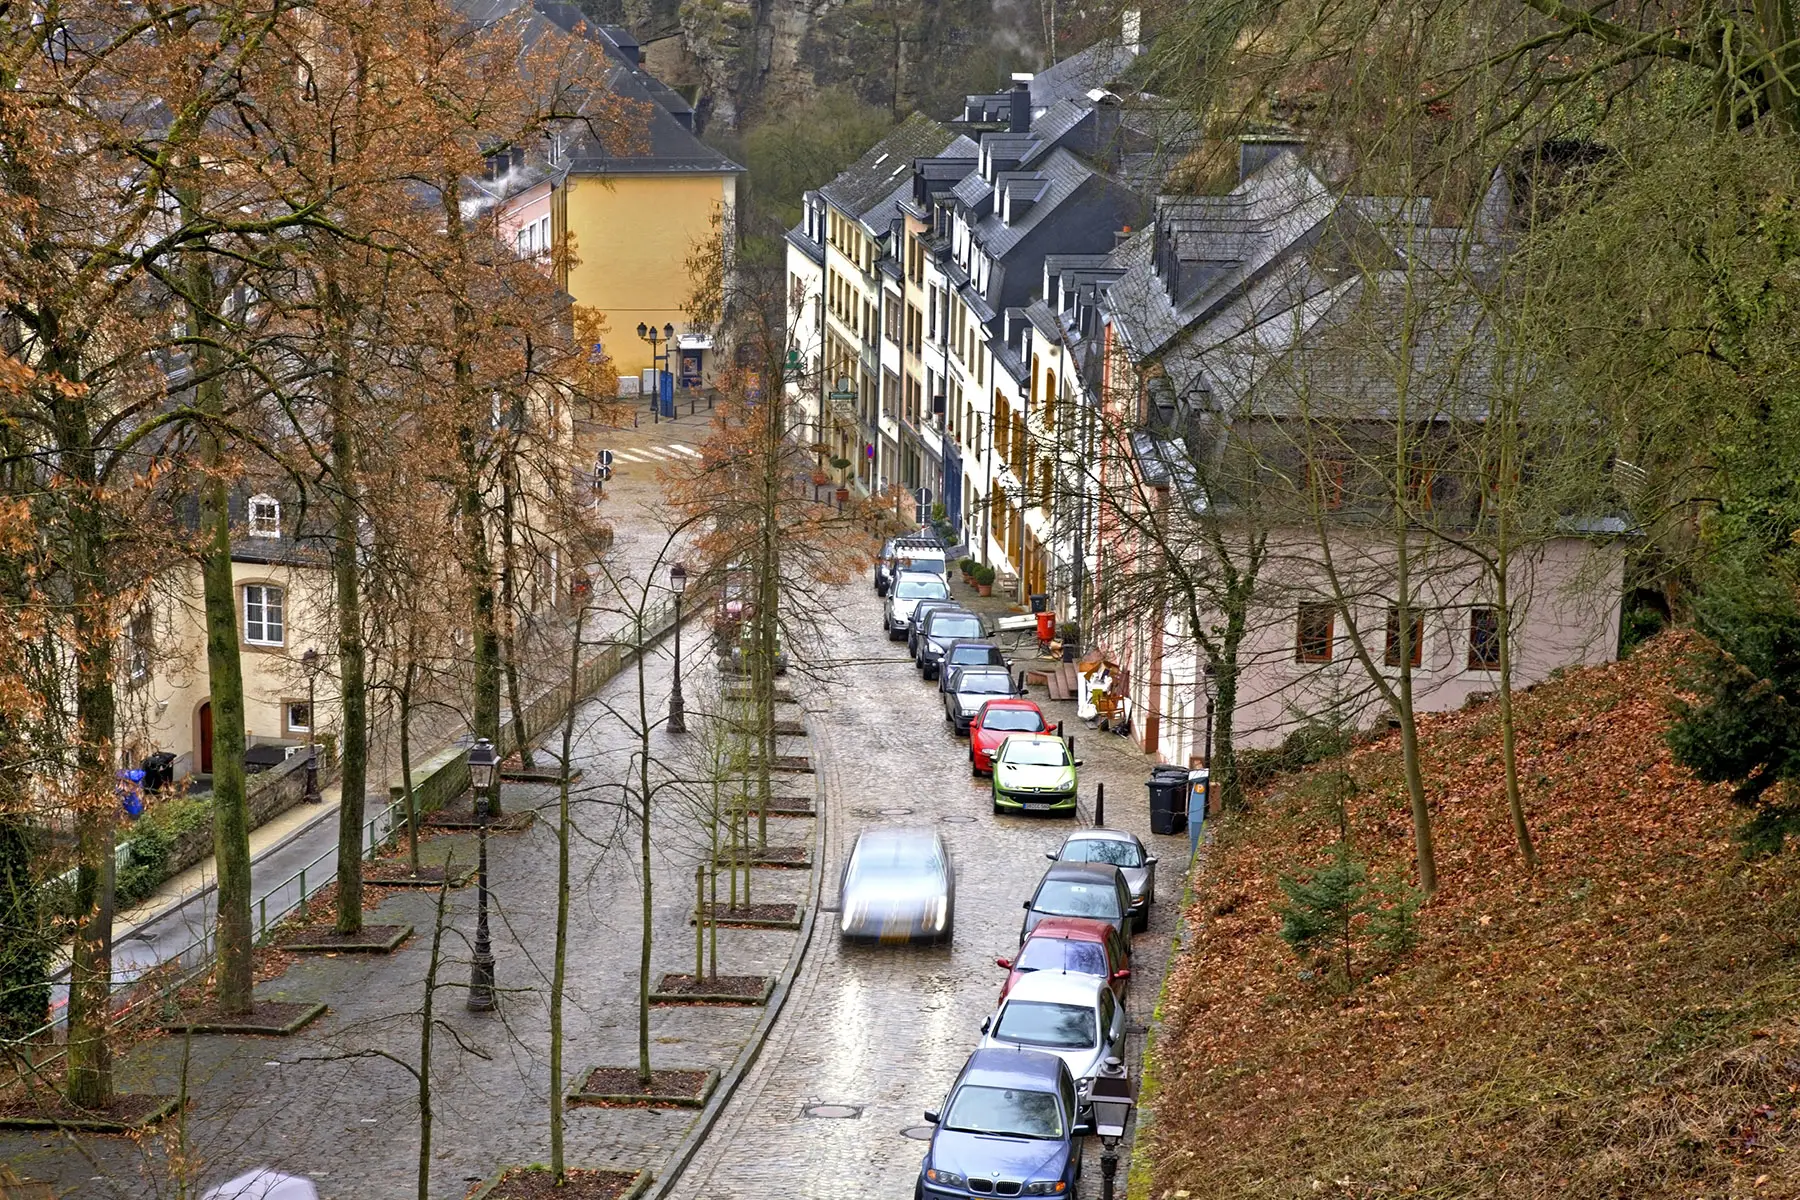 Cars on a street in Luxembourg City